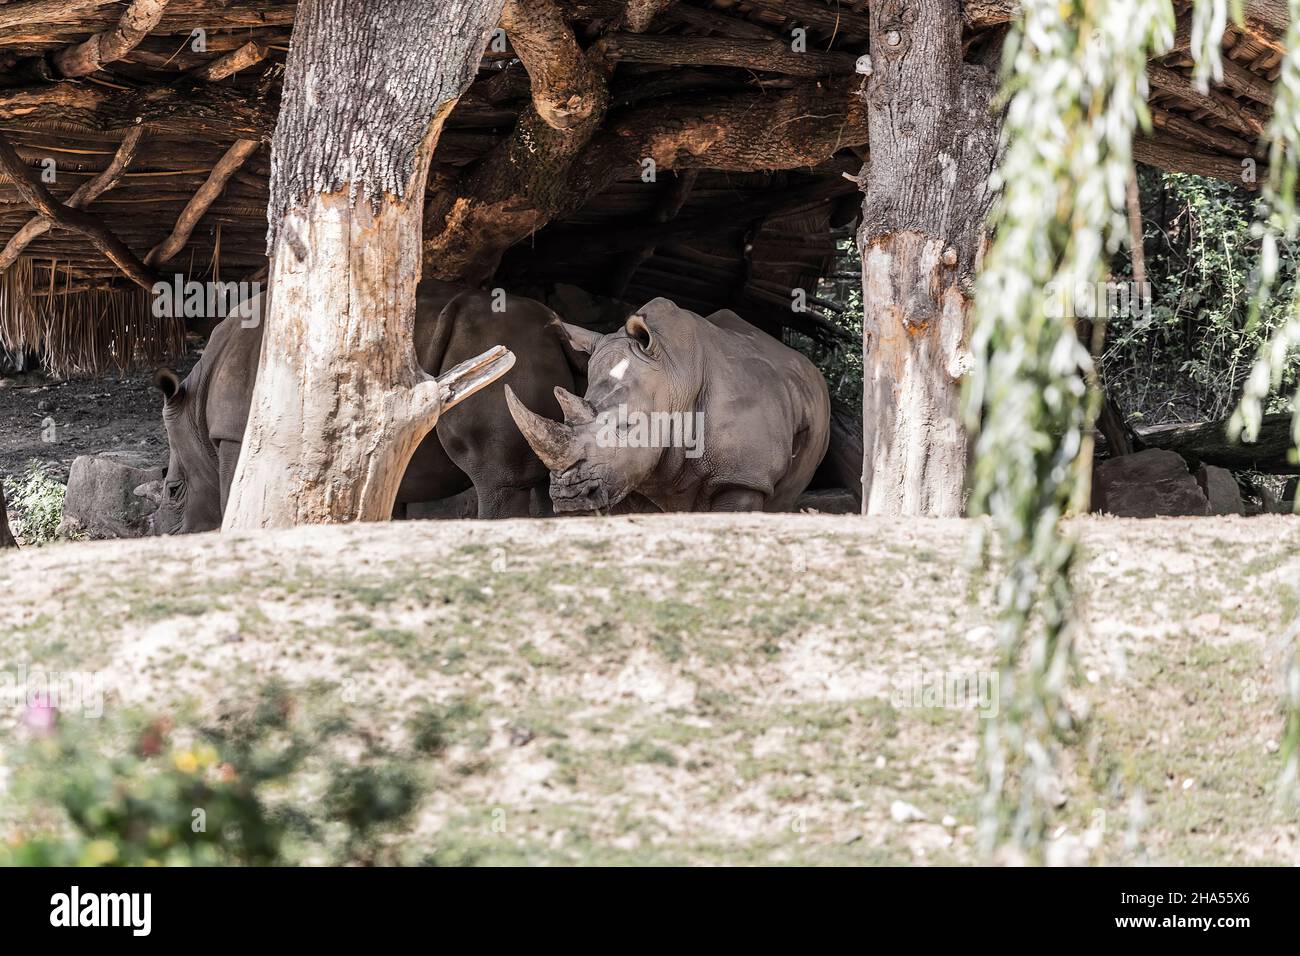 Several large rhinoceros hide from the midday sun under a wooden canopy Stock Photo